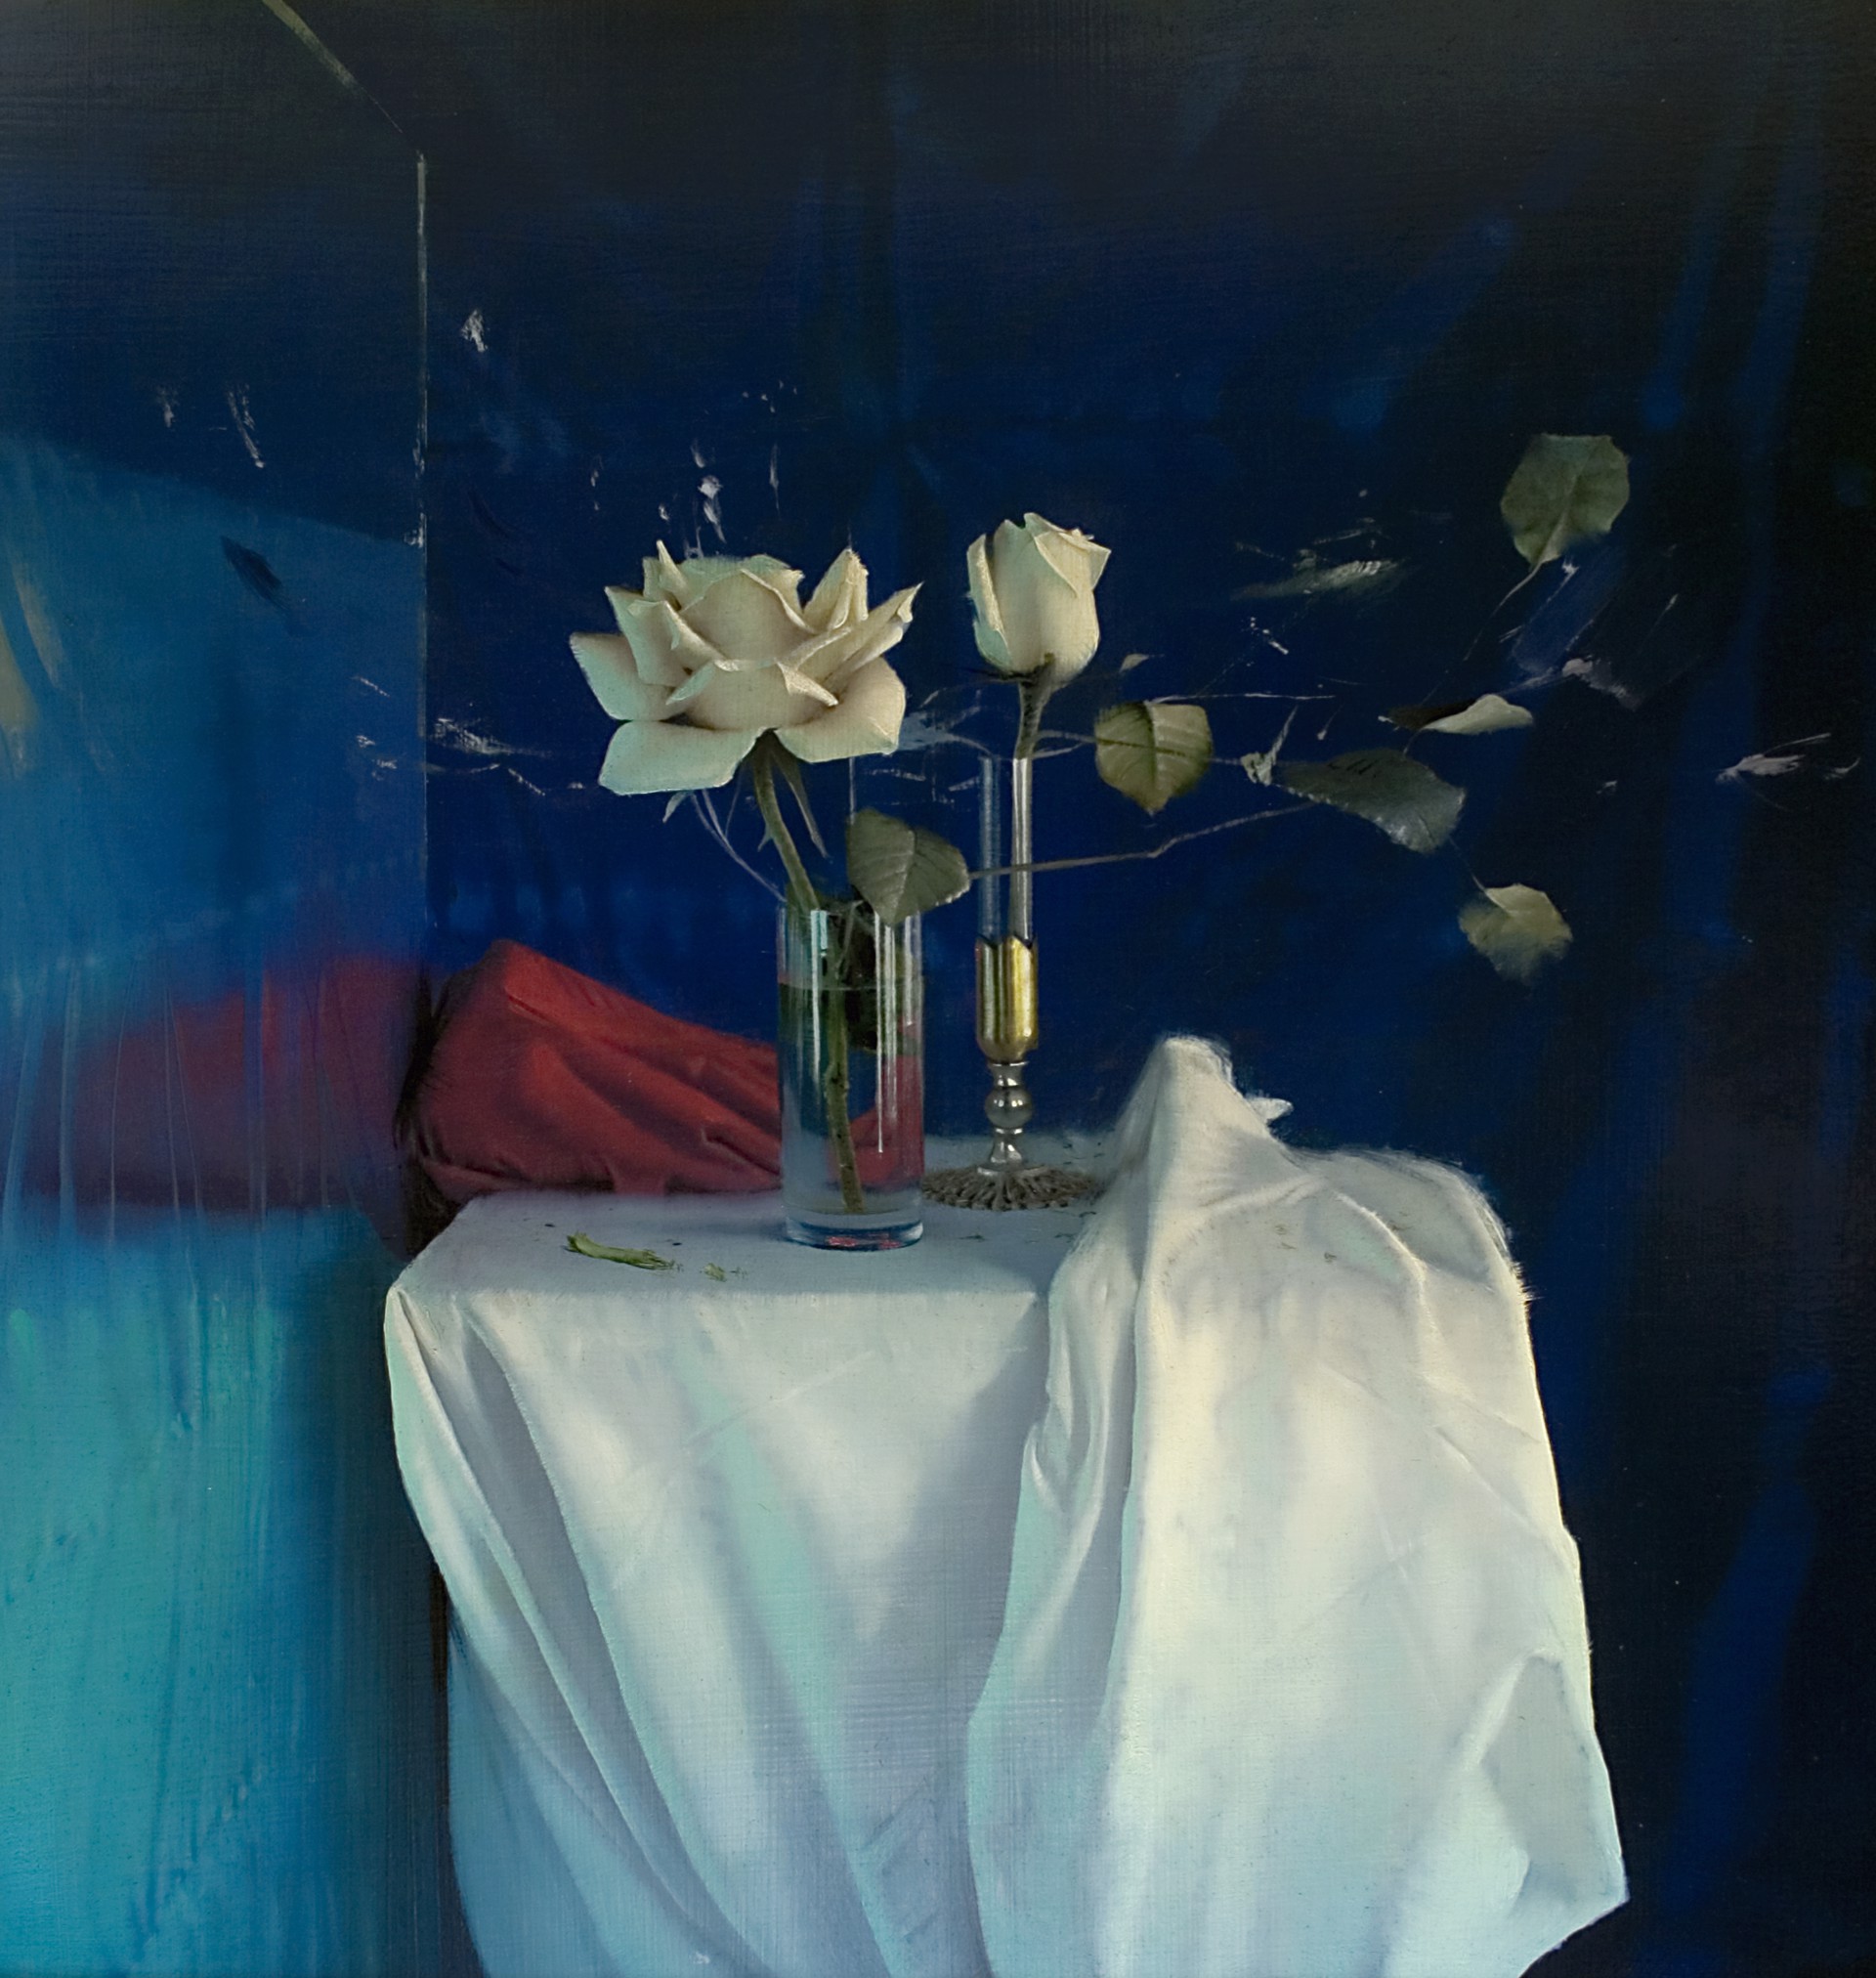 White Roses and Blue Cloth by Daniel Sprick